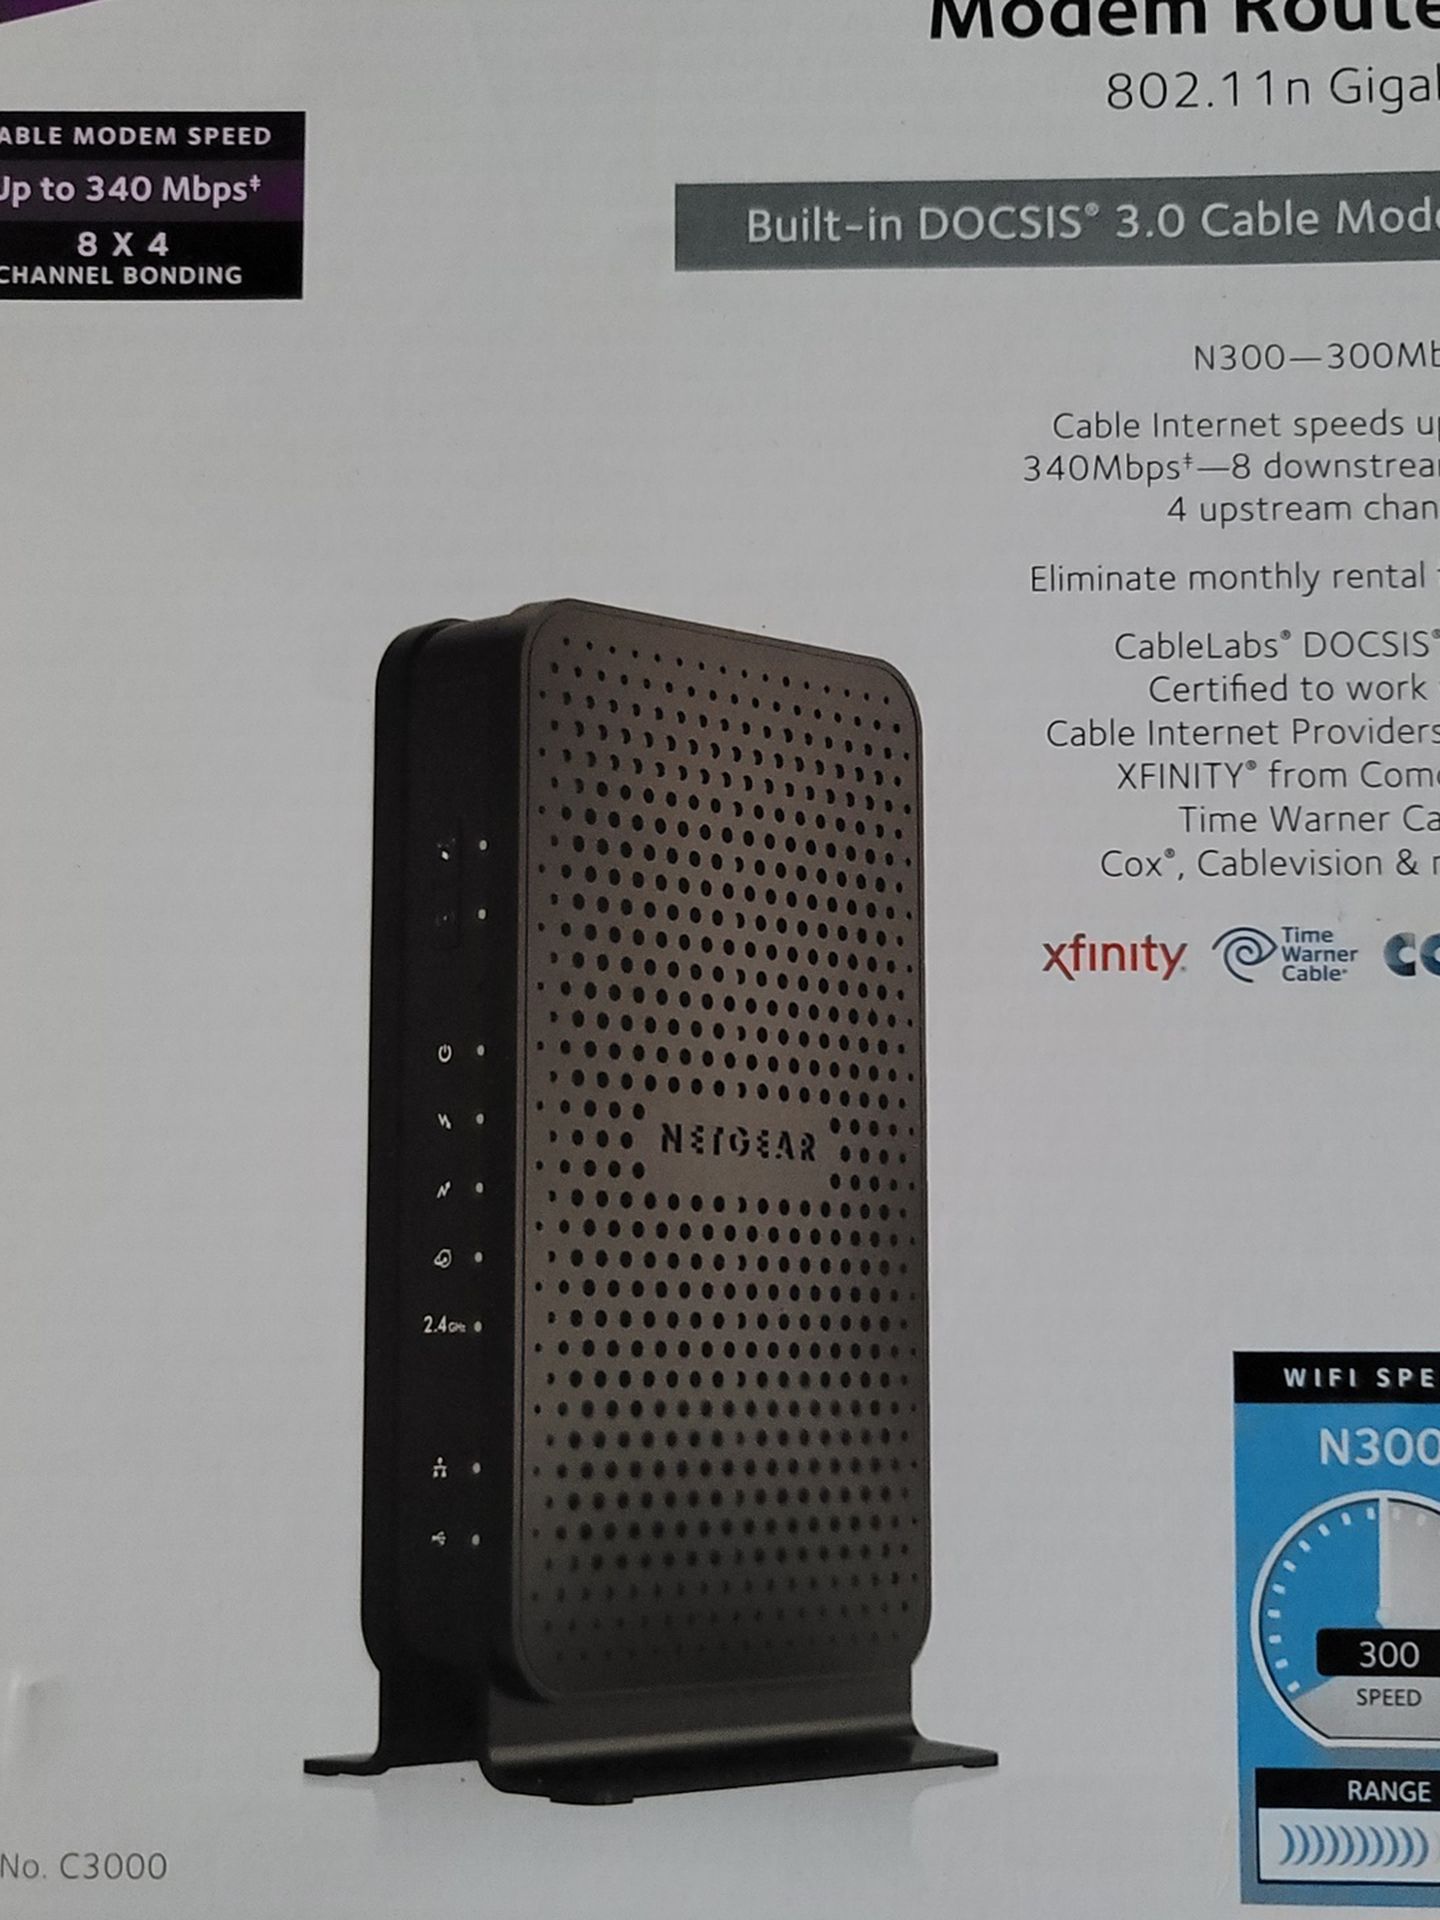 NETGEAR C3000-100NAS N300 (8x4) WiFi DOCSIS 3.0 Cable Modem Router (C3000) Certified for Xfinity from Comcast, Spectrum, Cox, Cablevision